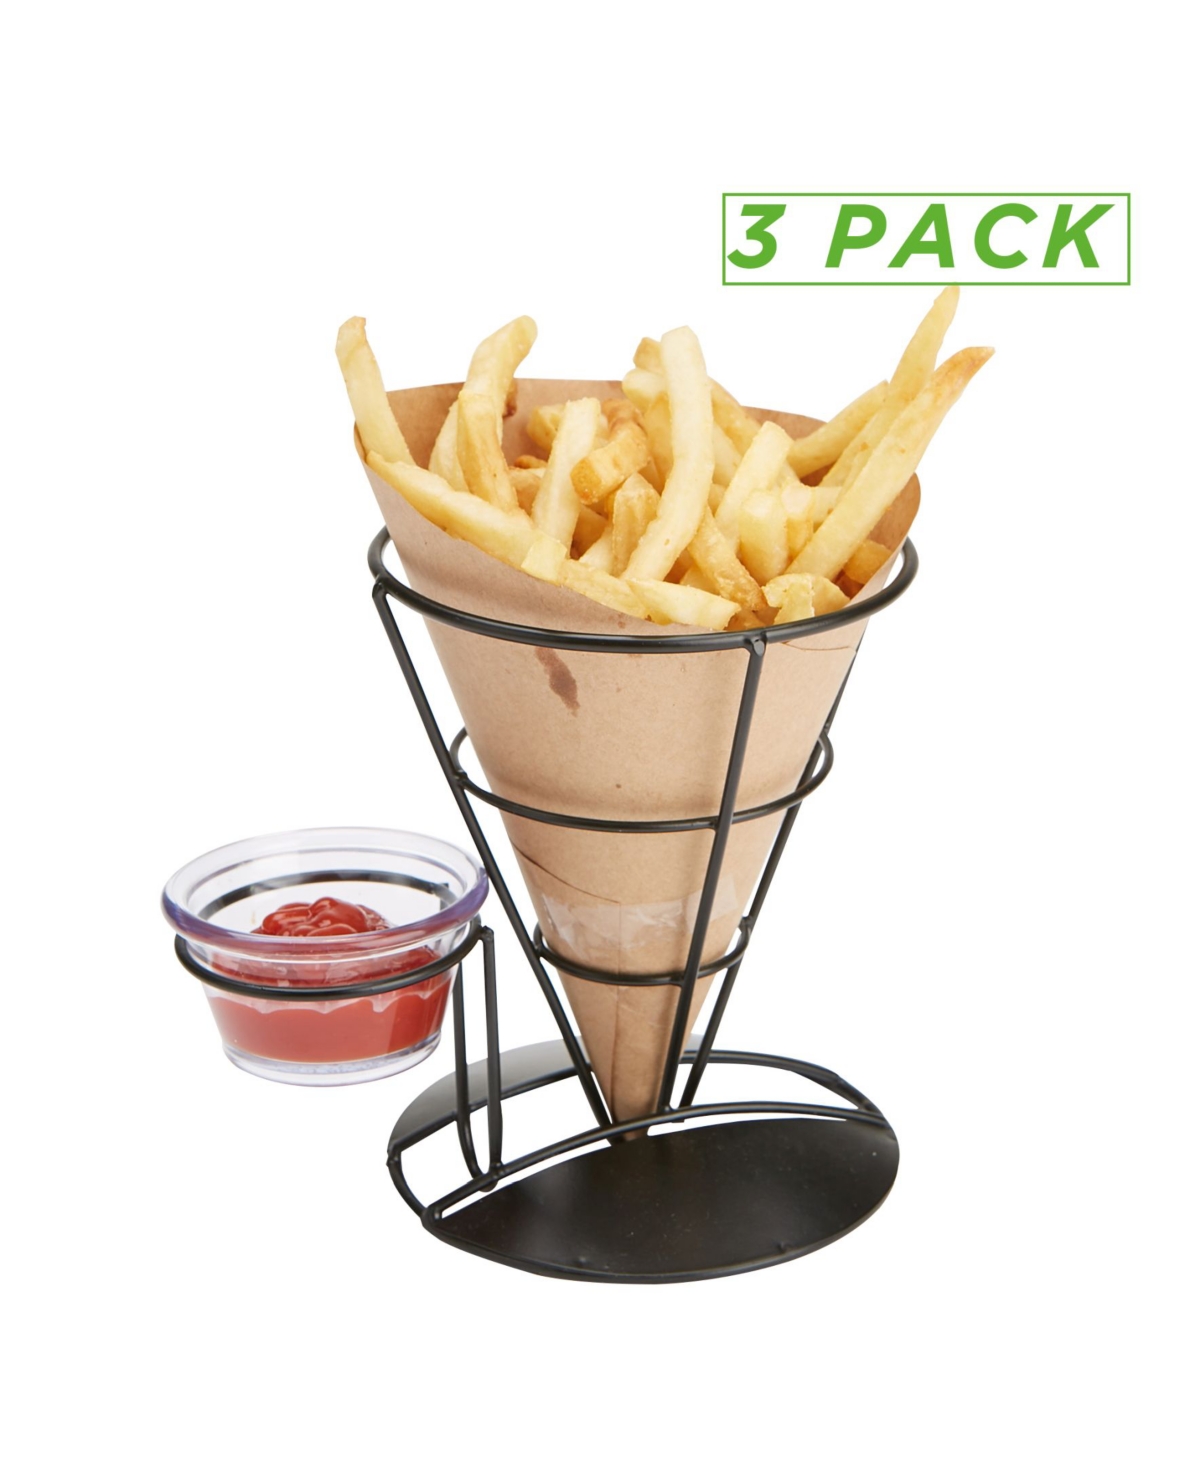 3 Pack French Fry Cone Holder with Condiment Storage - Black